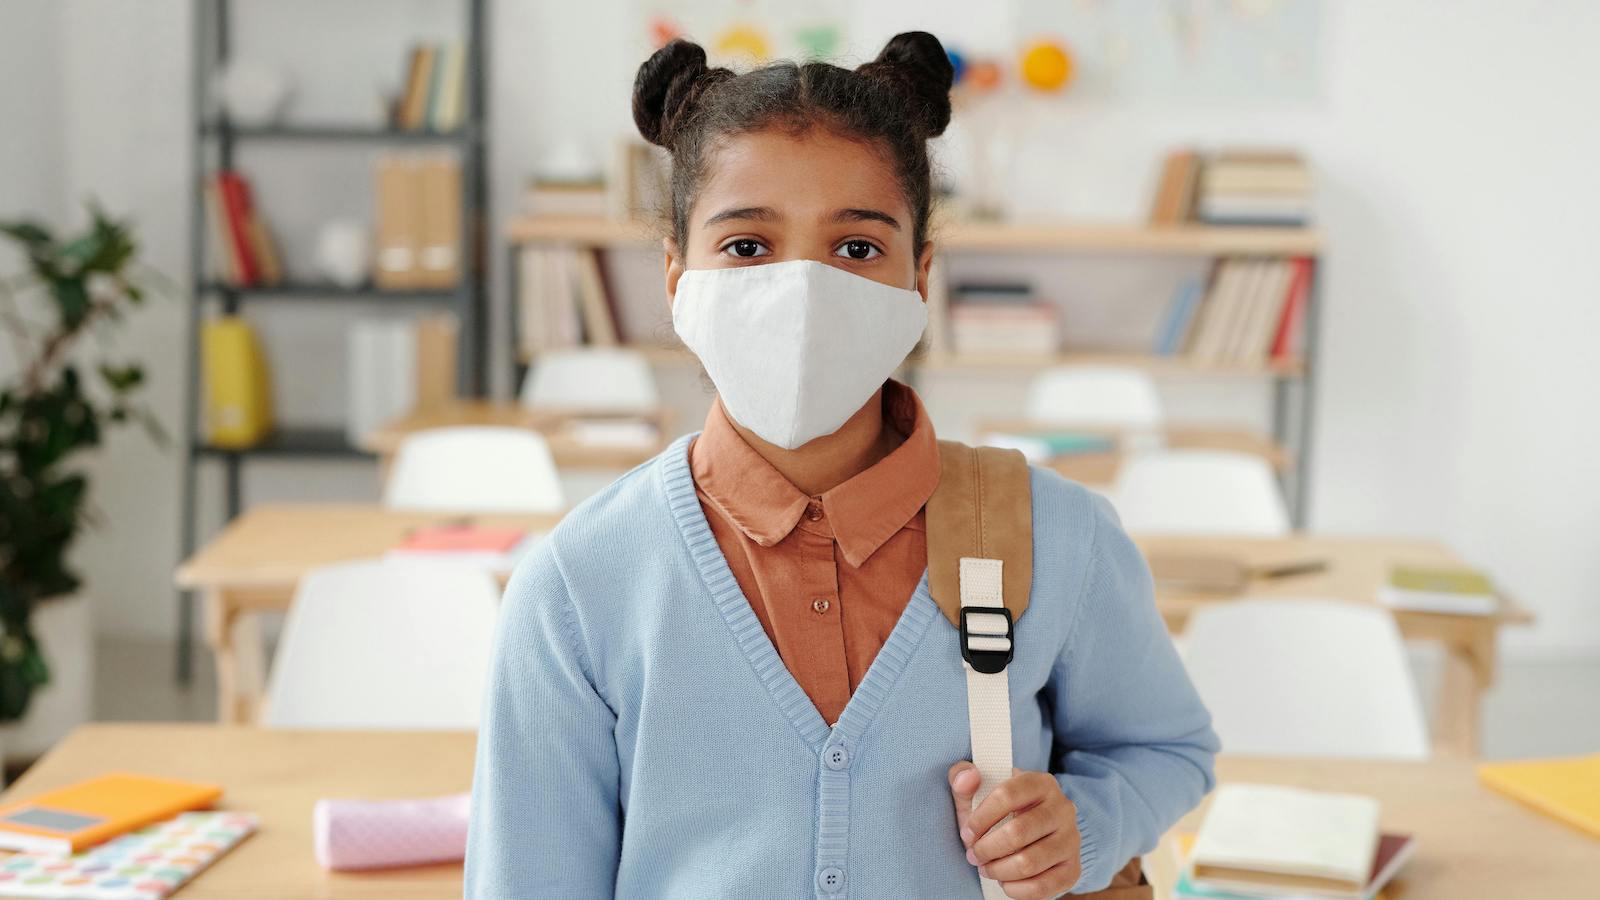 A Student Wearing a Face Mask